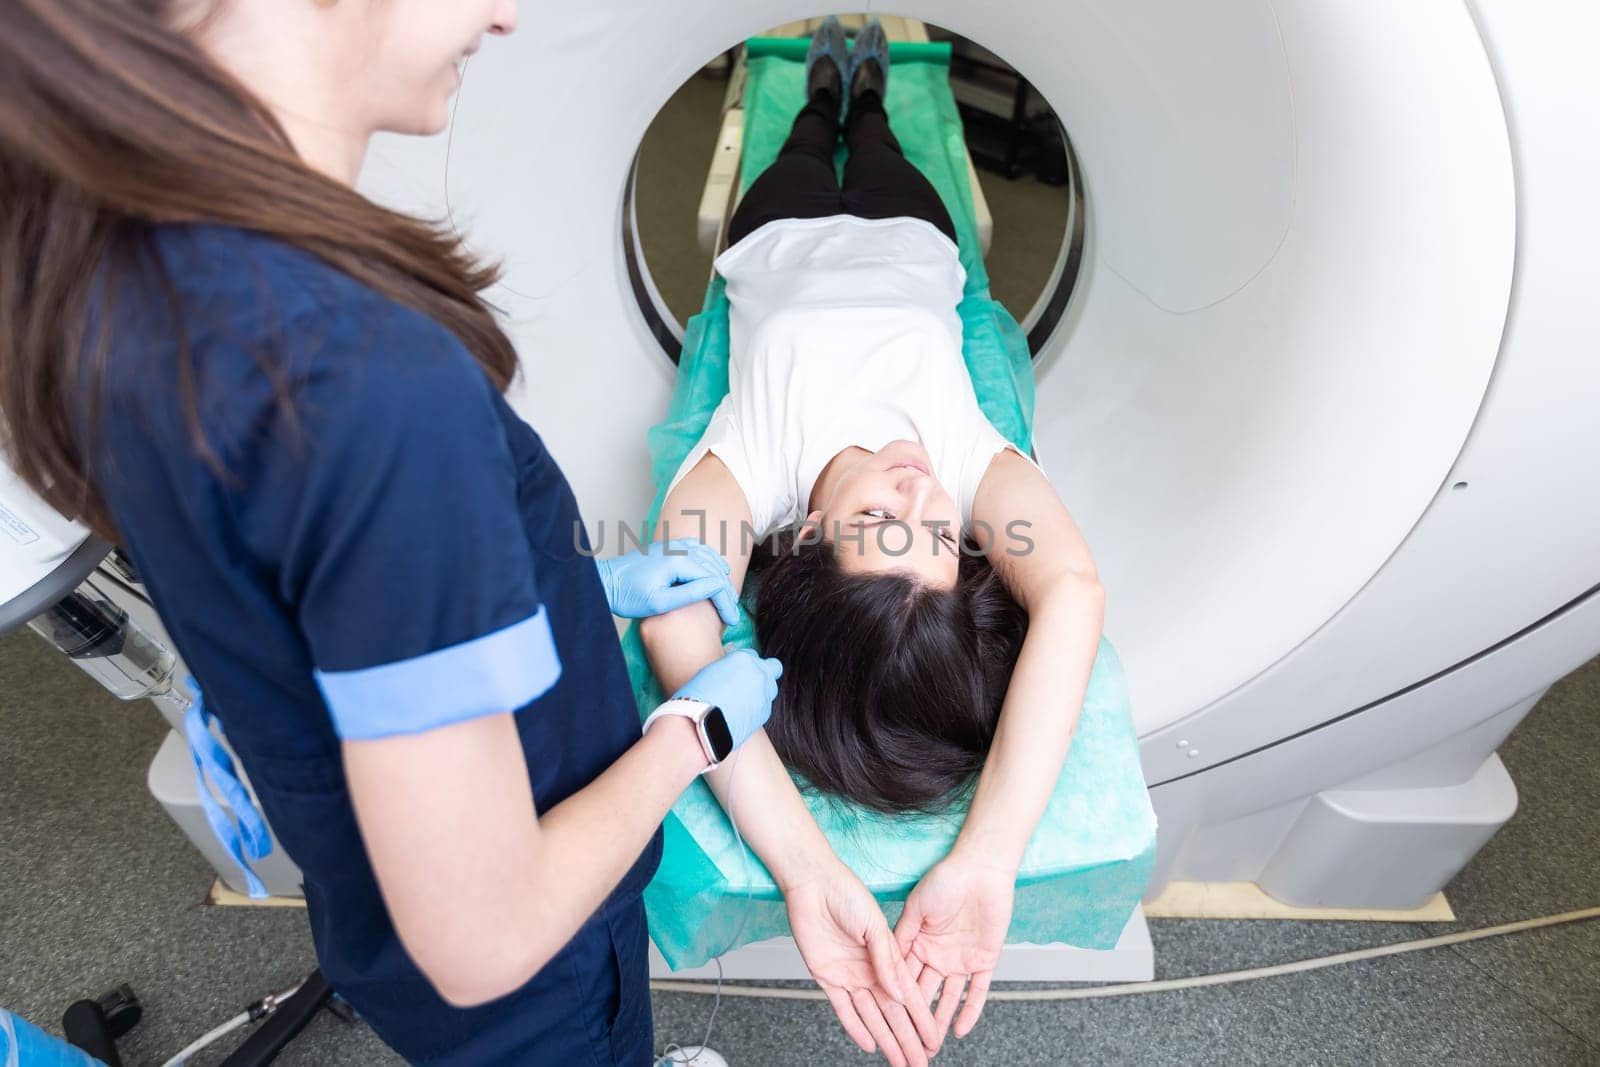 Pretty, young woman goiing through a Computerized Axial Tomography CAT Scan medical test examination in a modern hospital.